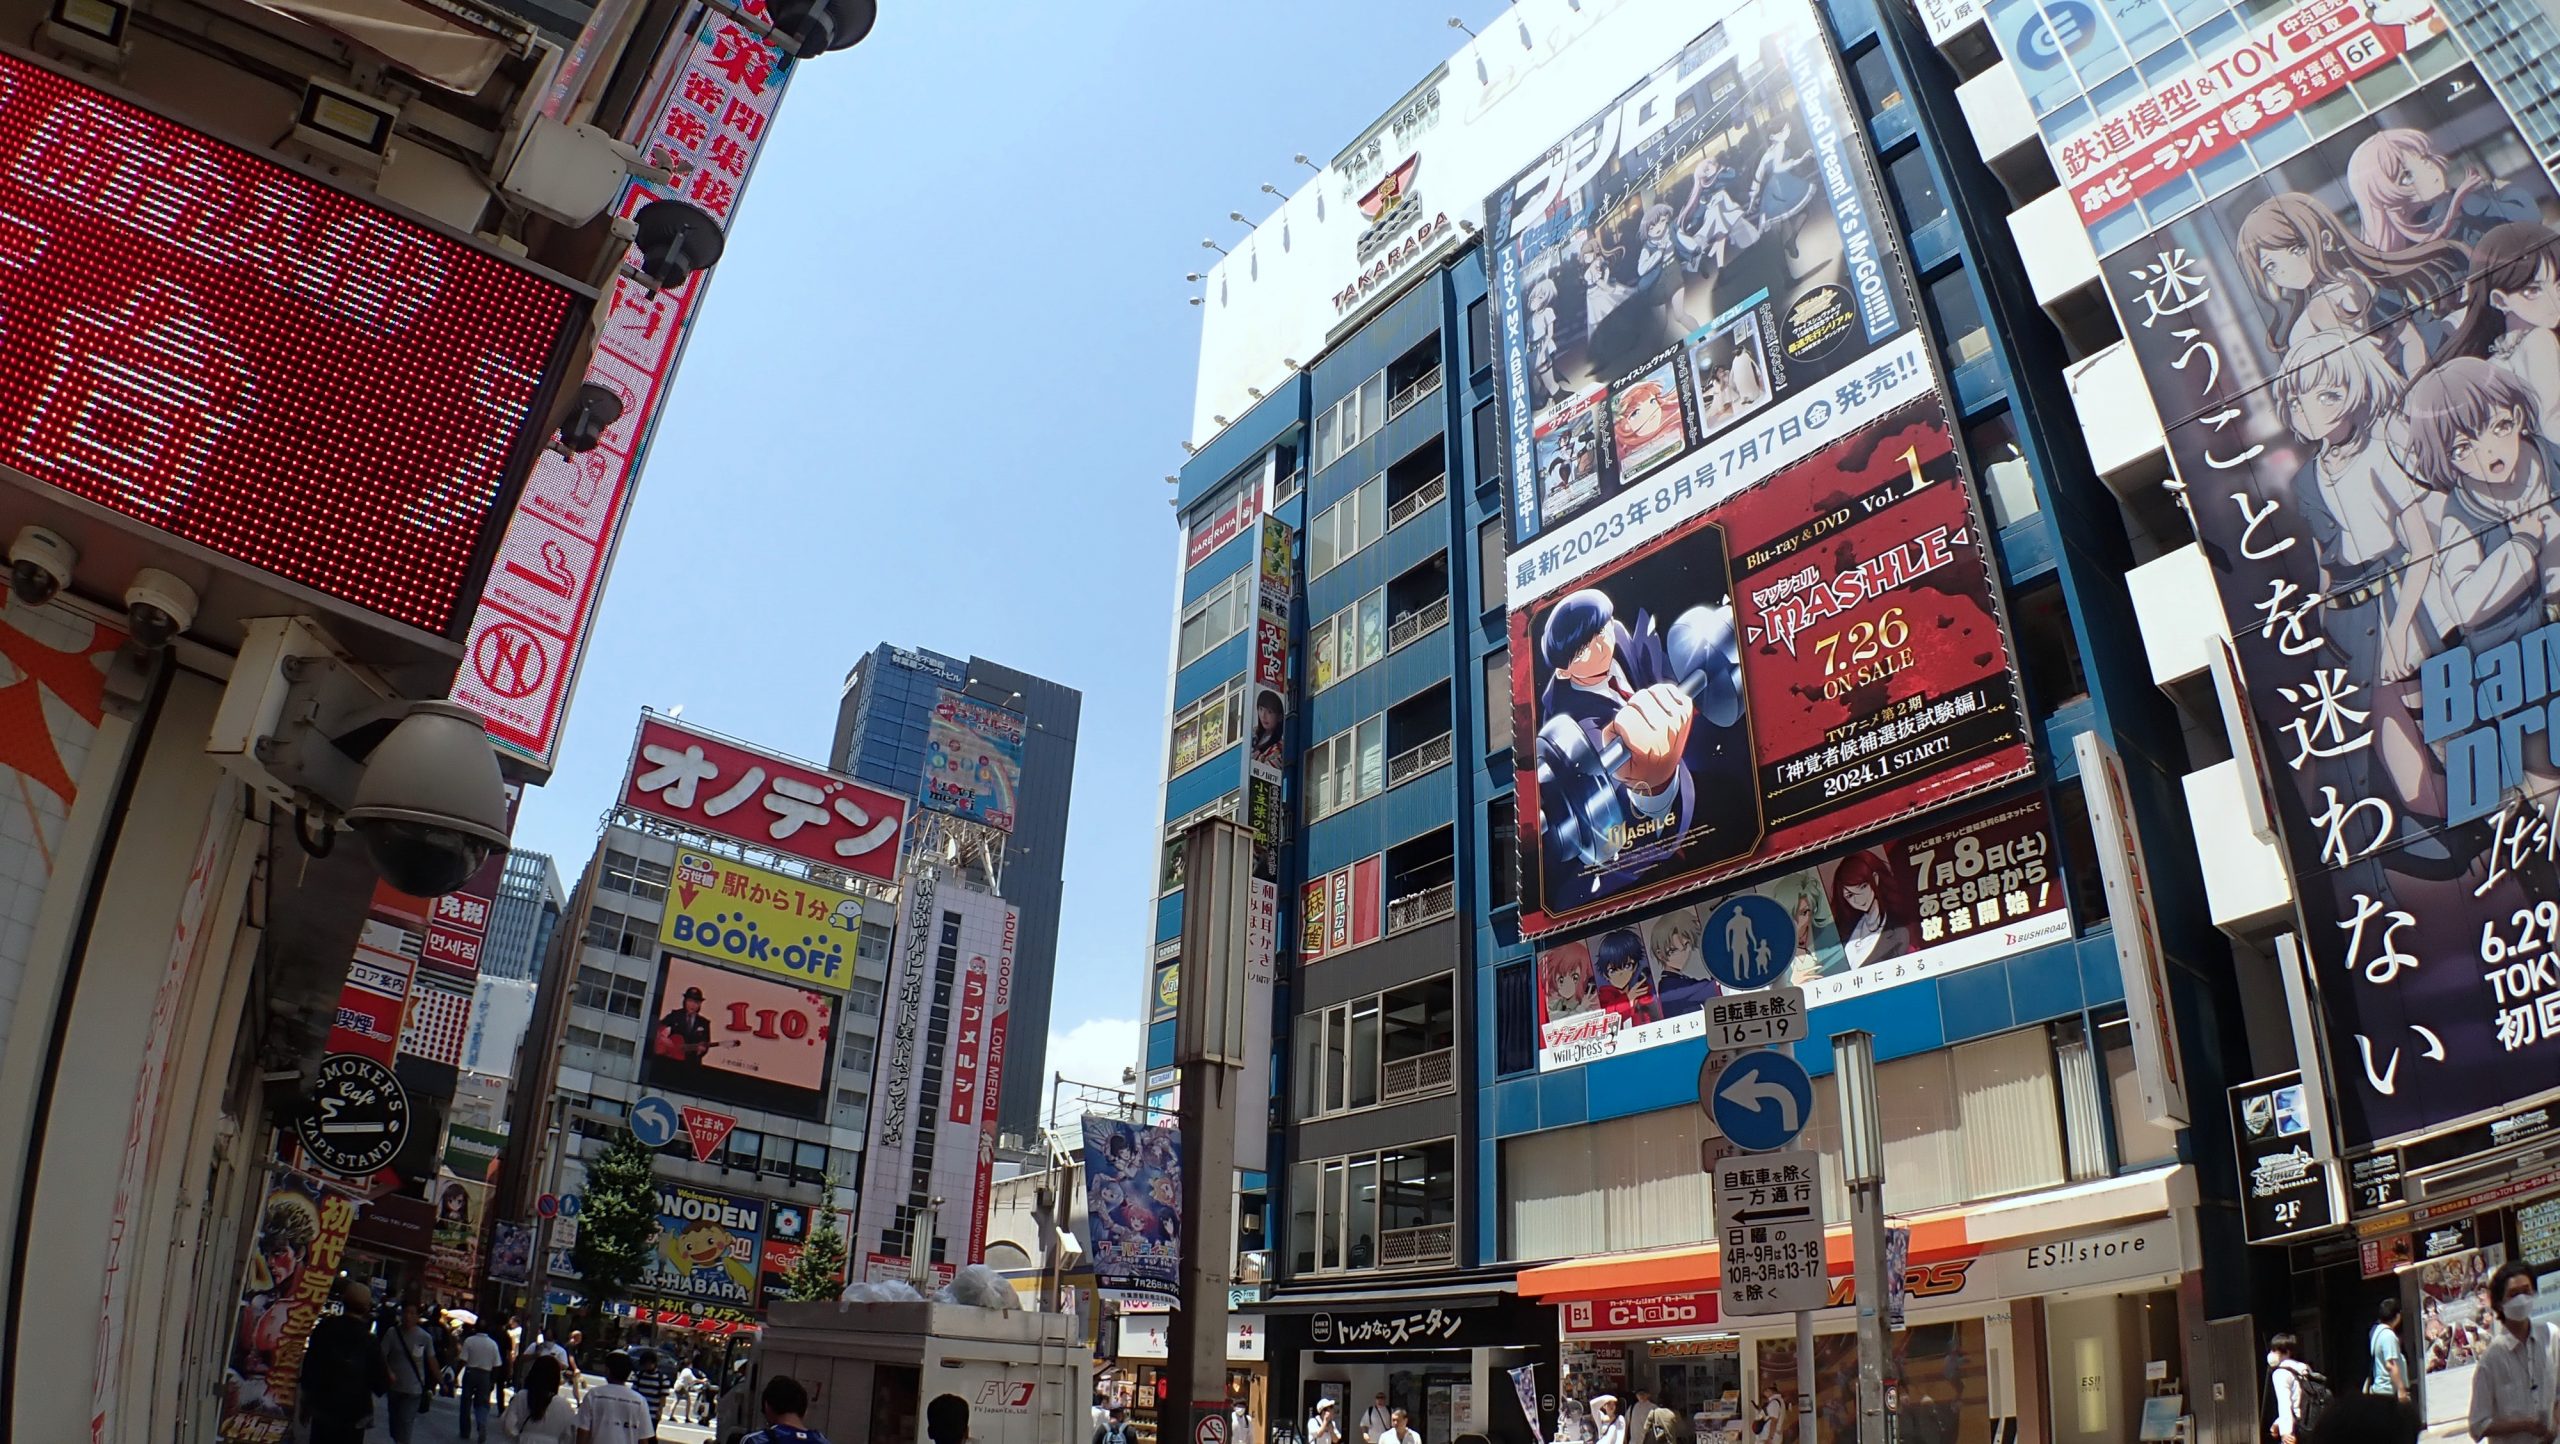 With Japan's otaku haven Akihabara soon undergoing redevelopment, some fear it may lose its charm